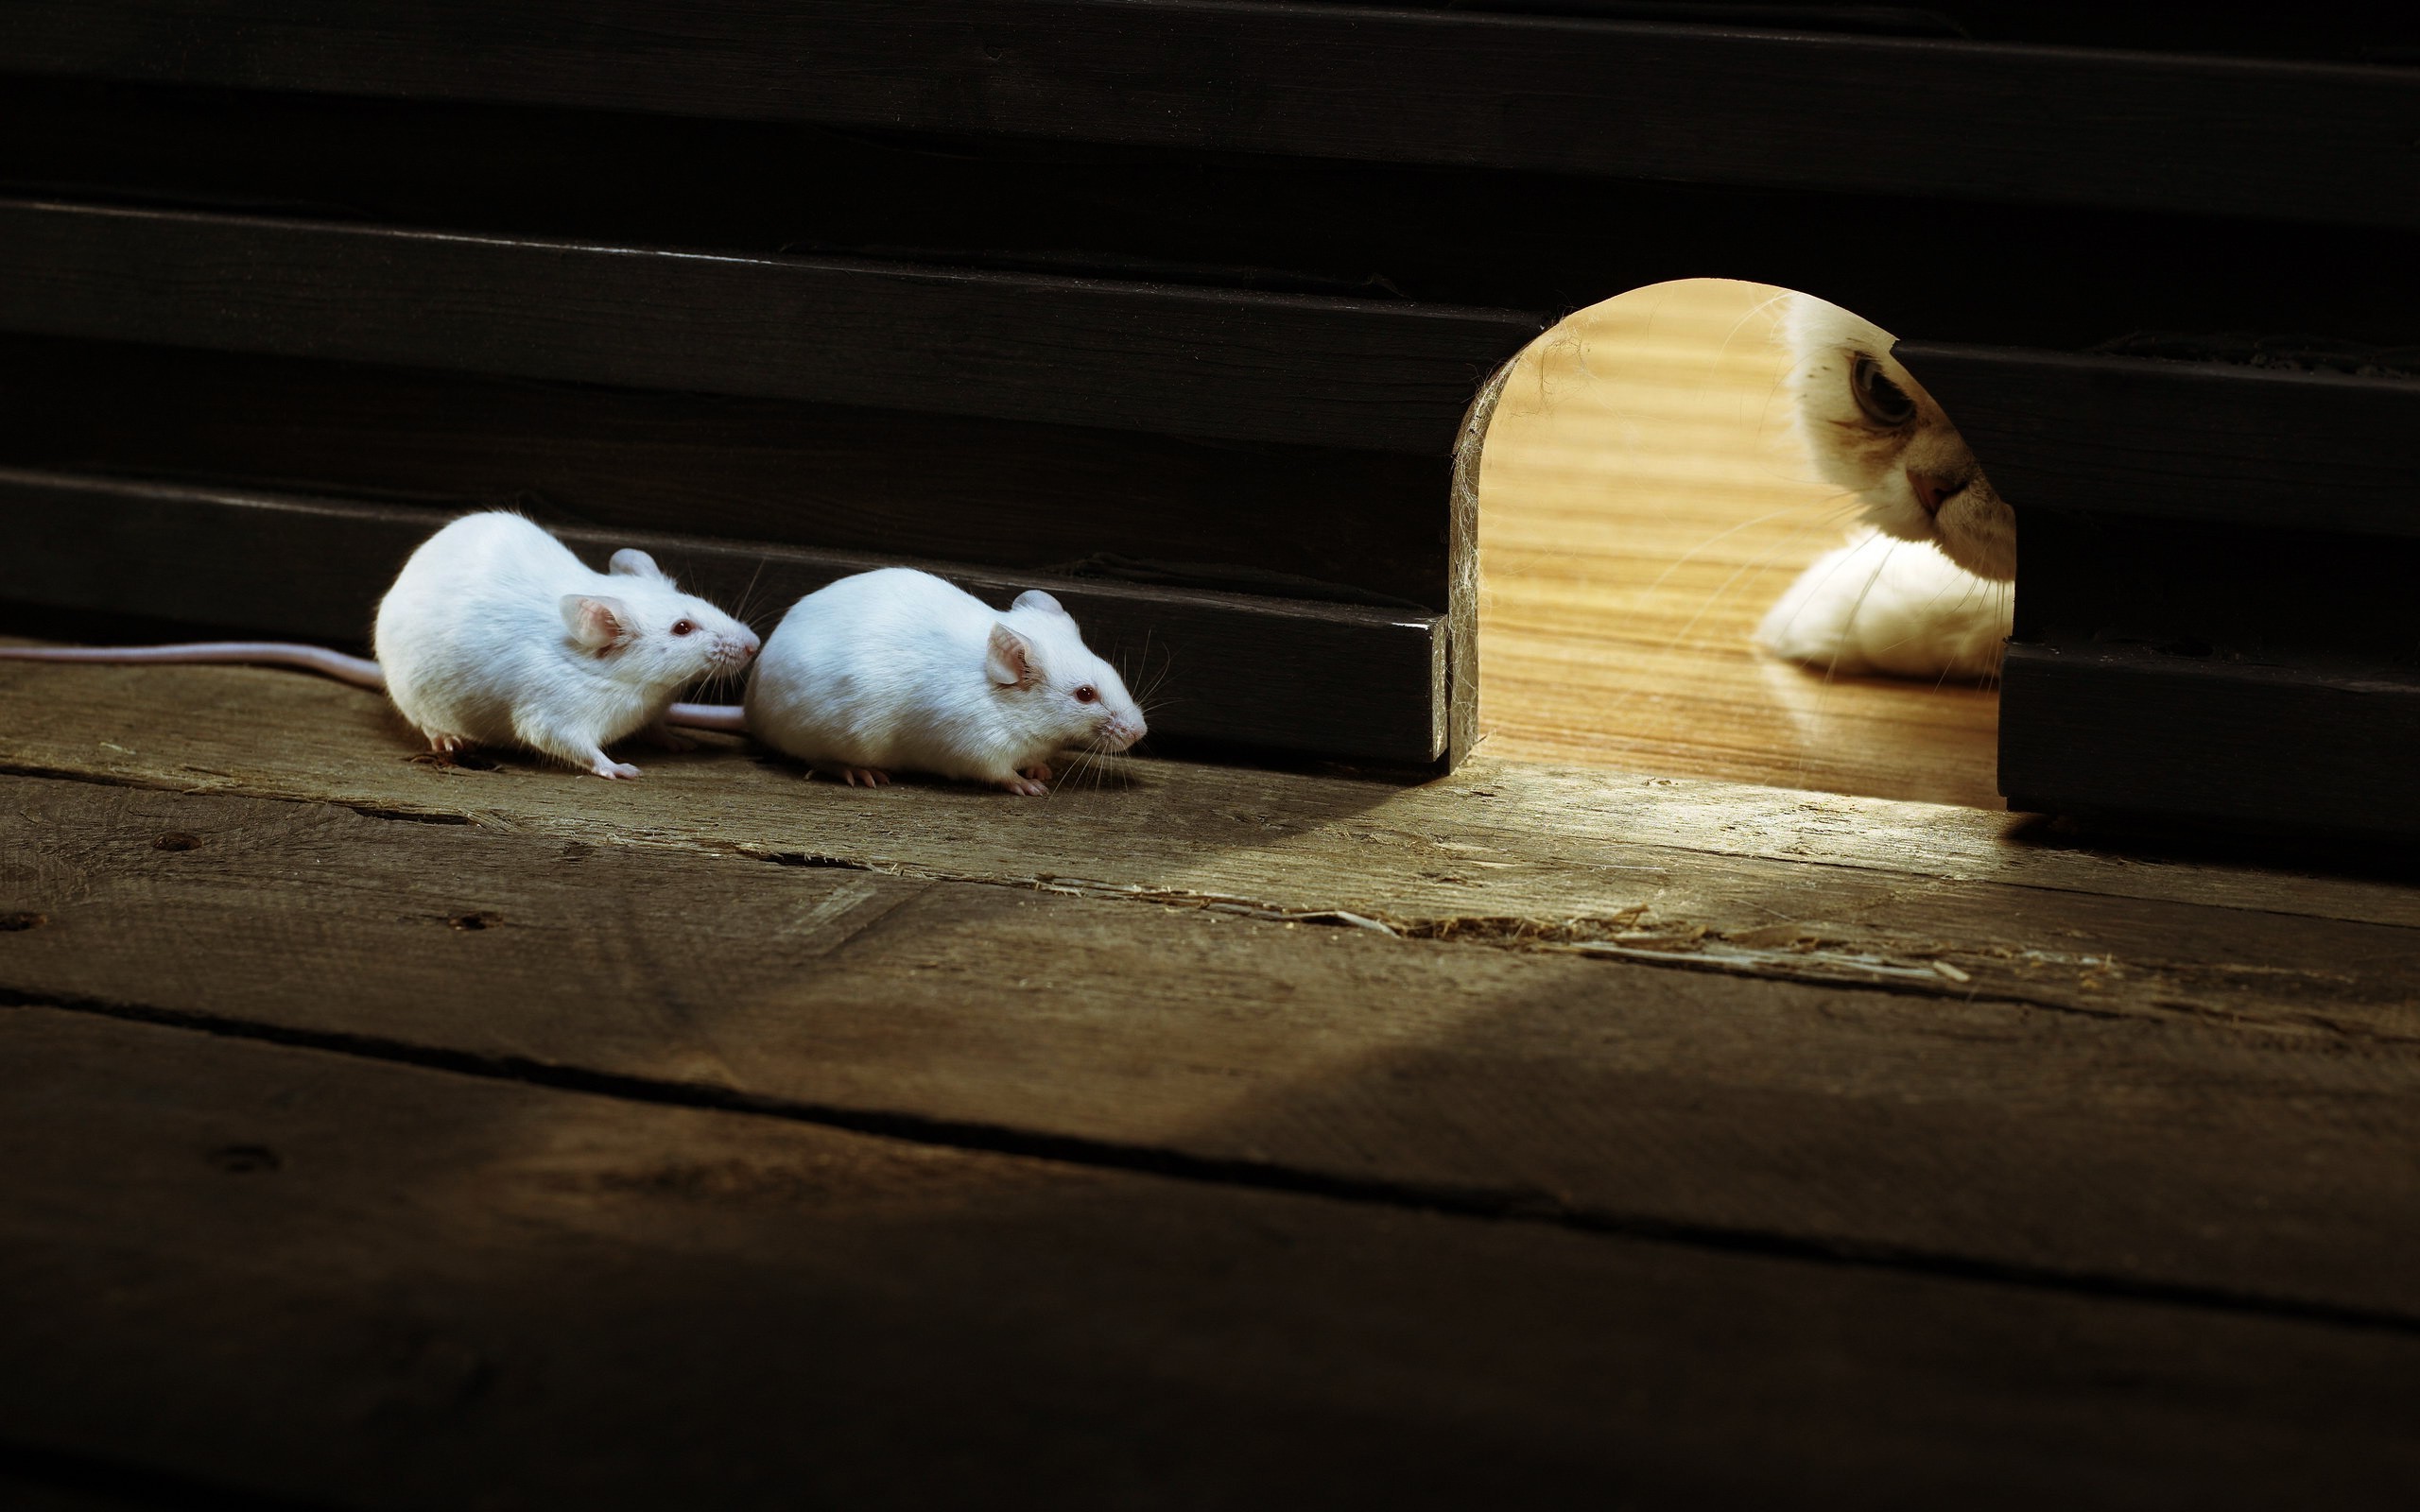 nature, Animals, Cat, Mice, Wood, Wooden Surface, Waiting, White Wallpaper